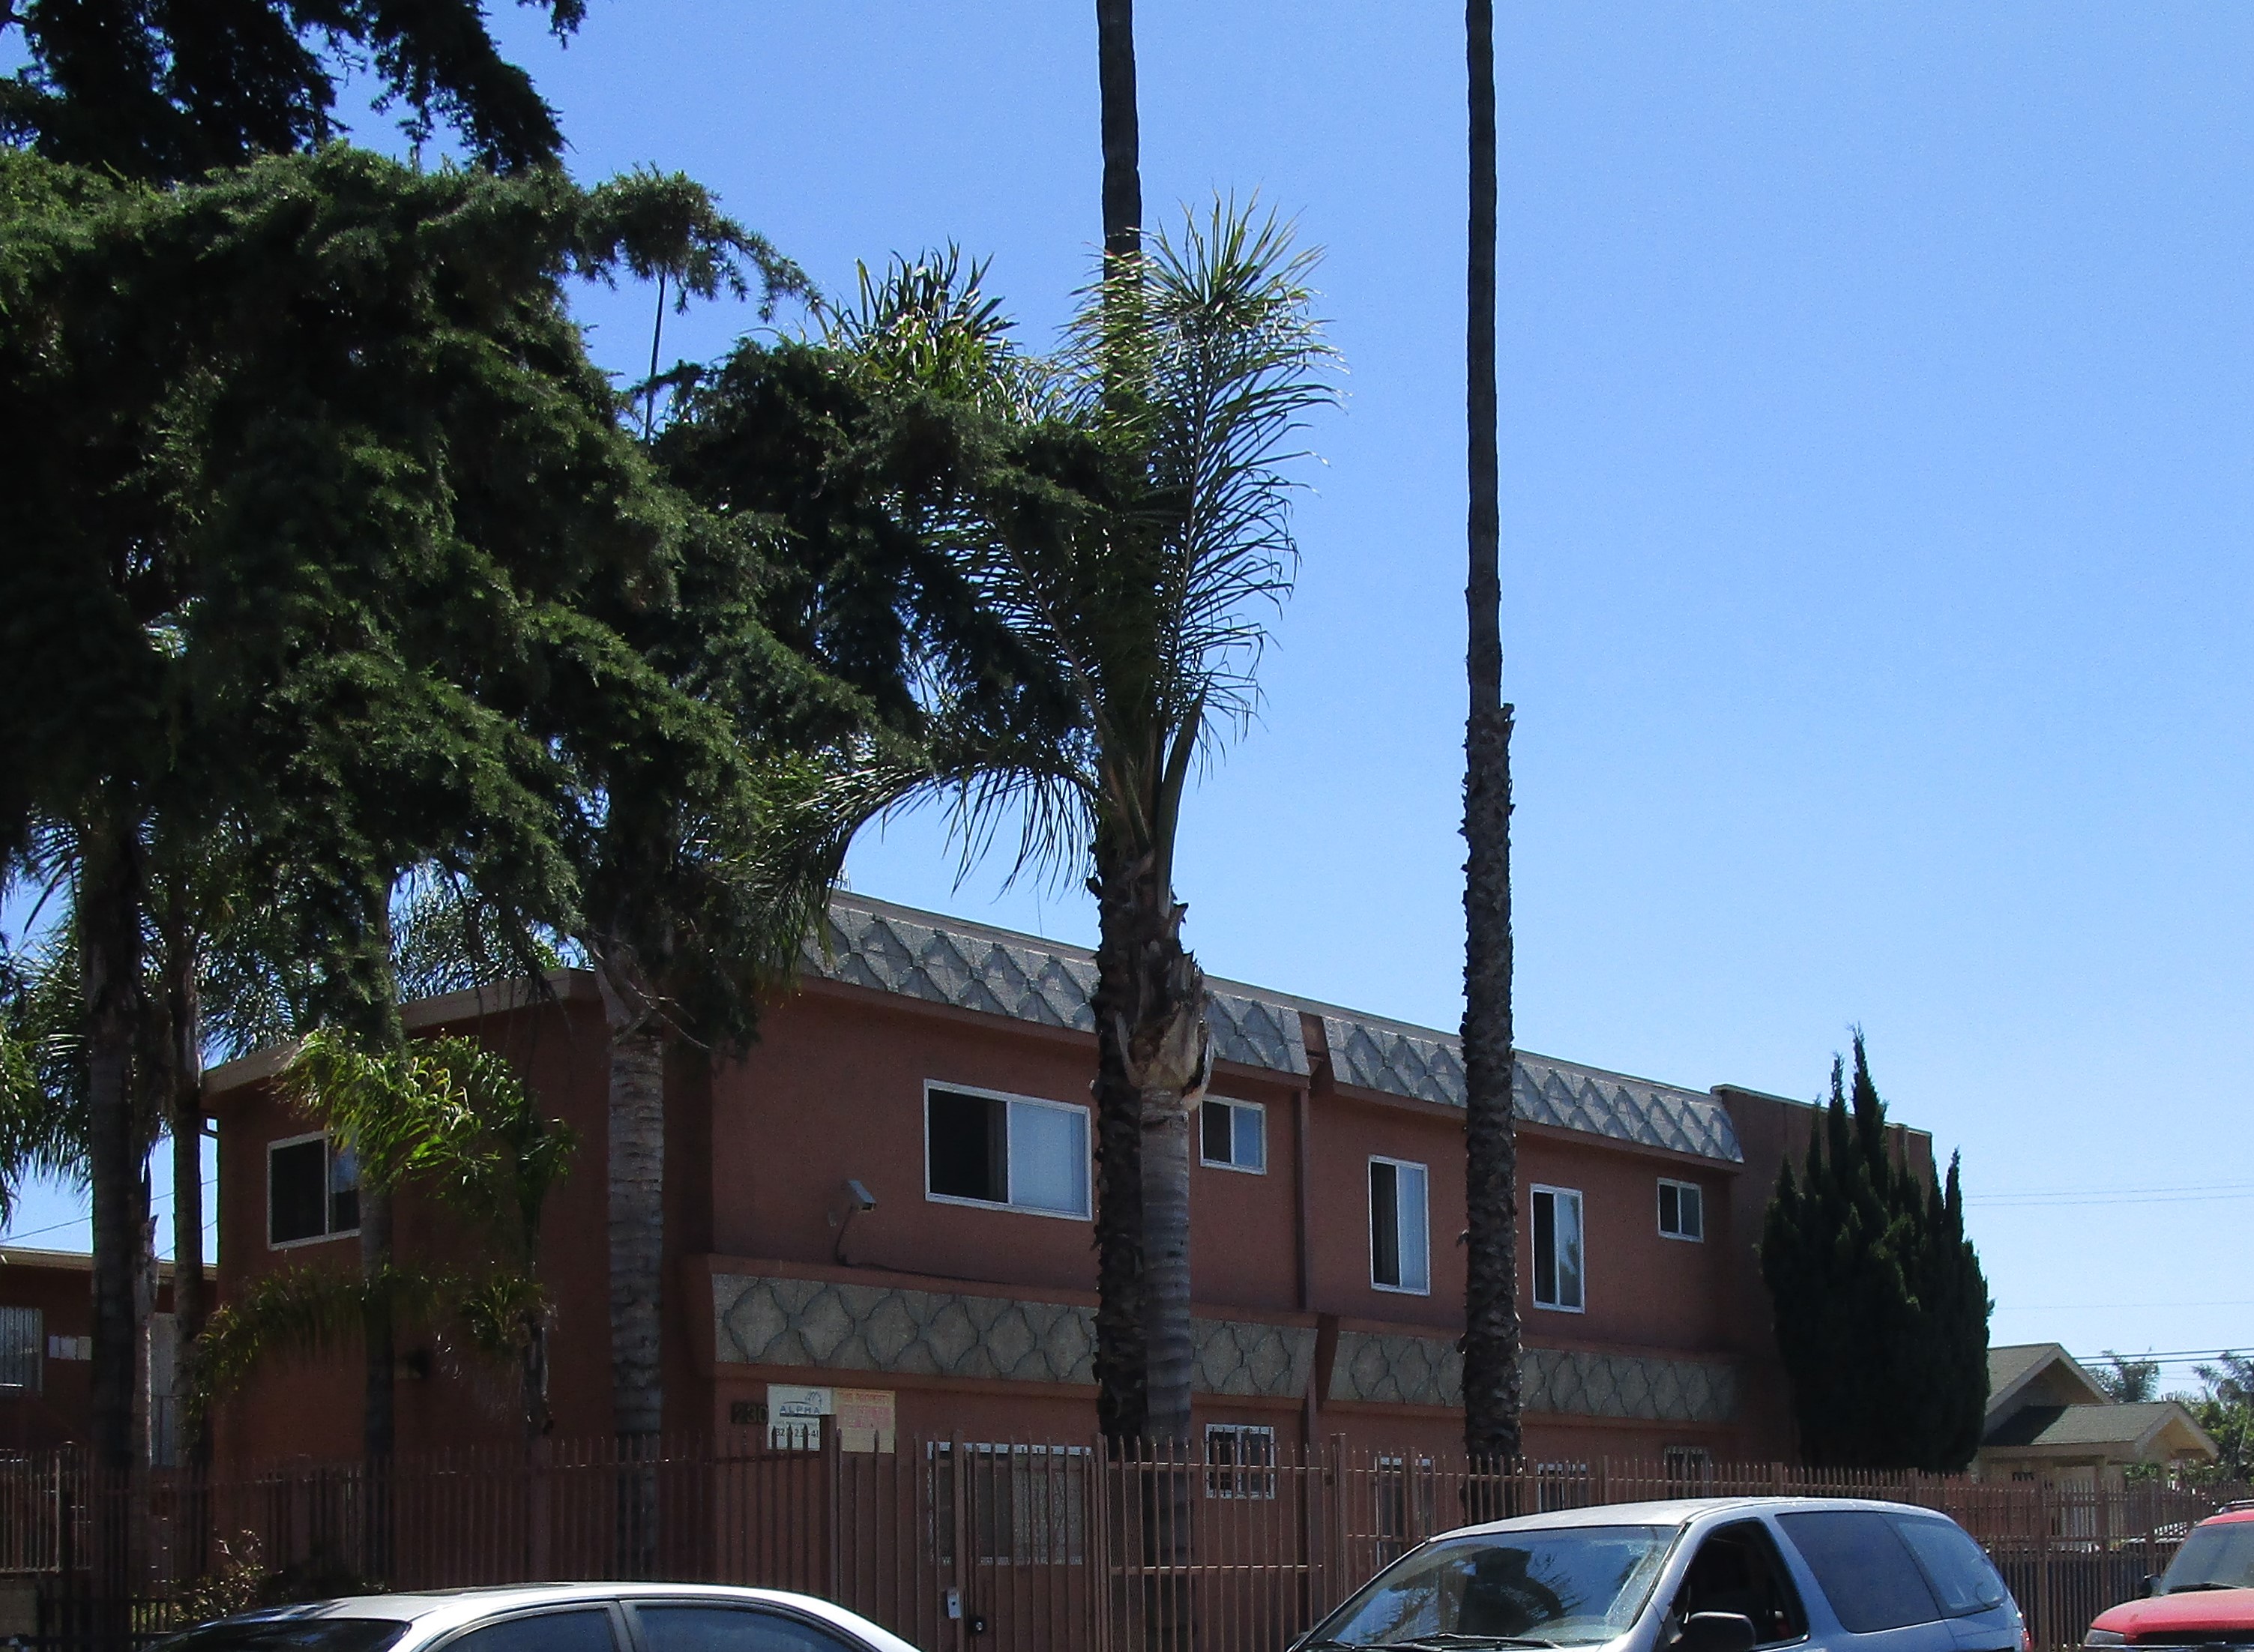 Side view of a brick color 2 story building, white and silver designs, gated, Property signs on the wall, a camera hanging, palm and big trees around the building, three cars parked in front.